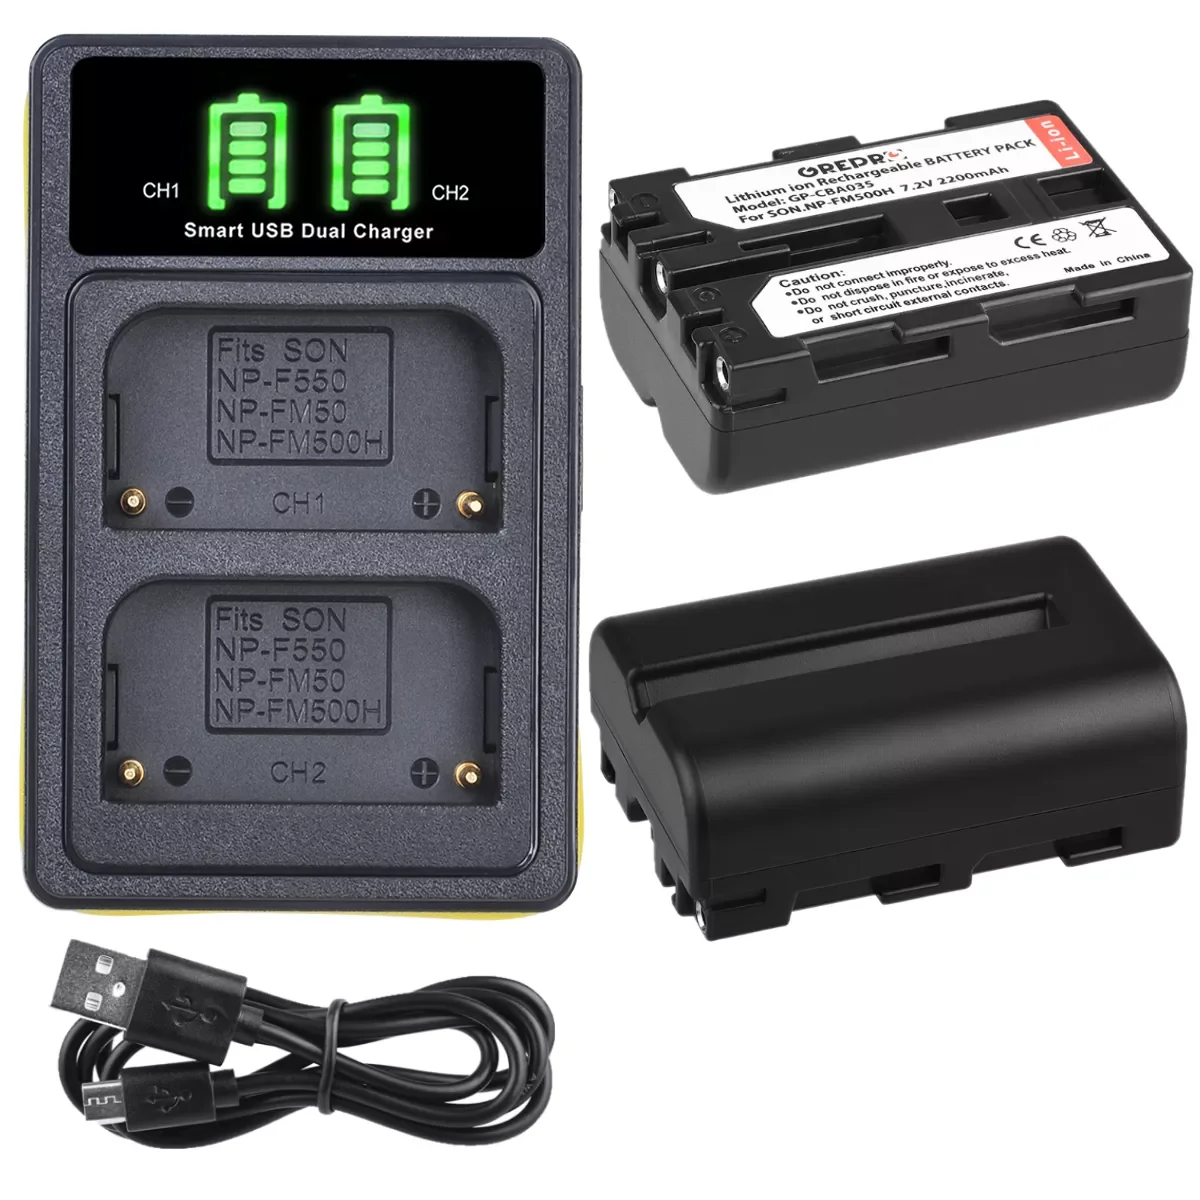 

NEW NP FM500H NP-FM500H Battery and Charger for Sony A58 A57 DSLR-A550 DSLR-A700 DSLR-A350 SLT-A77 SLT-A99 DSLR-A500 DSLR-A200